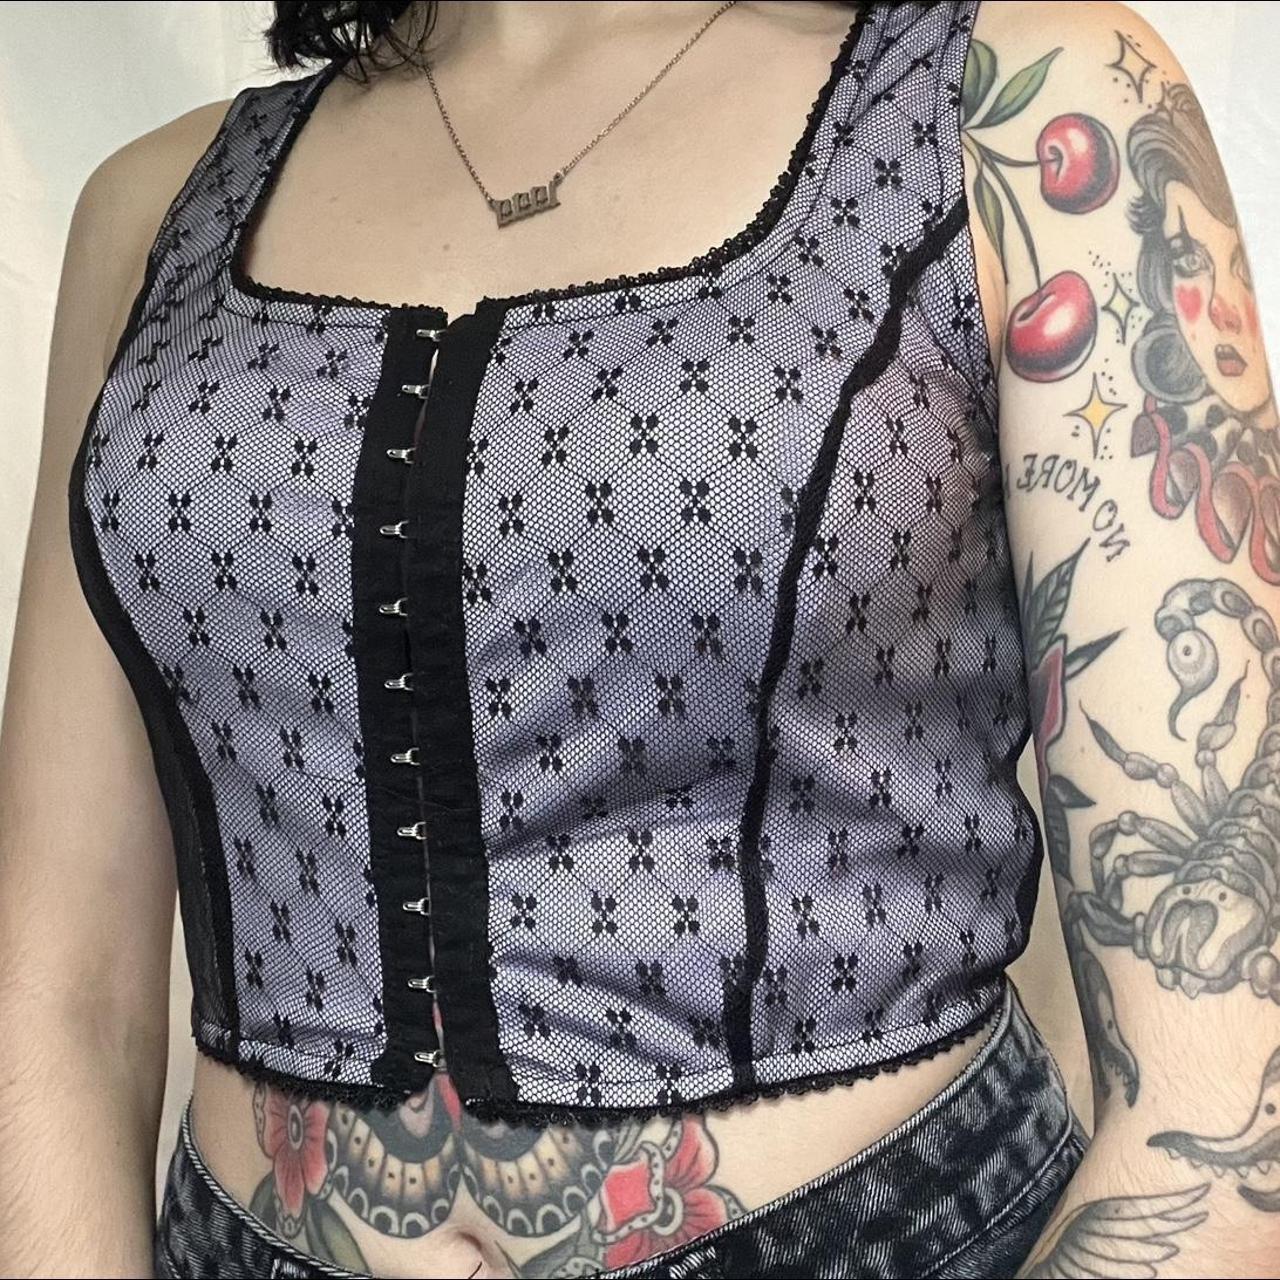 BY DYLN Cow Karter Corset Top 🐮🐄 BY DYLN Cow - Depop